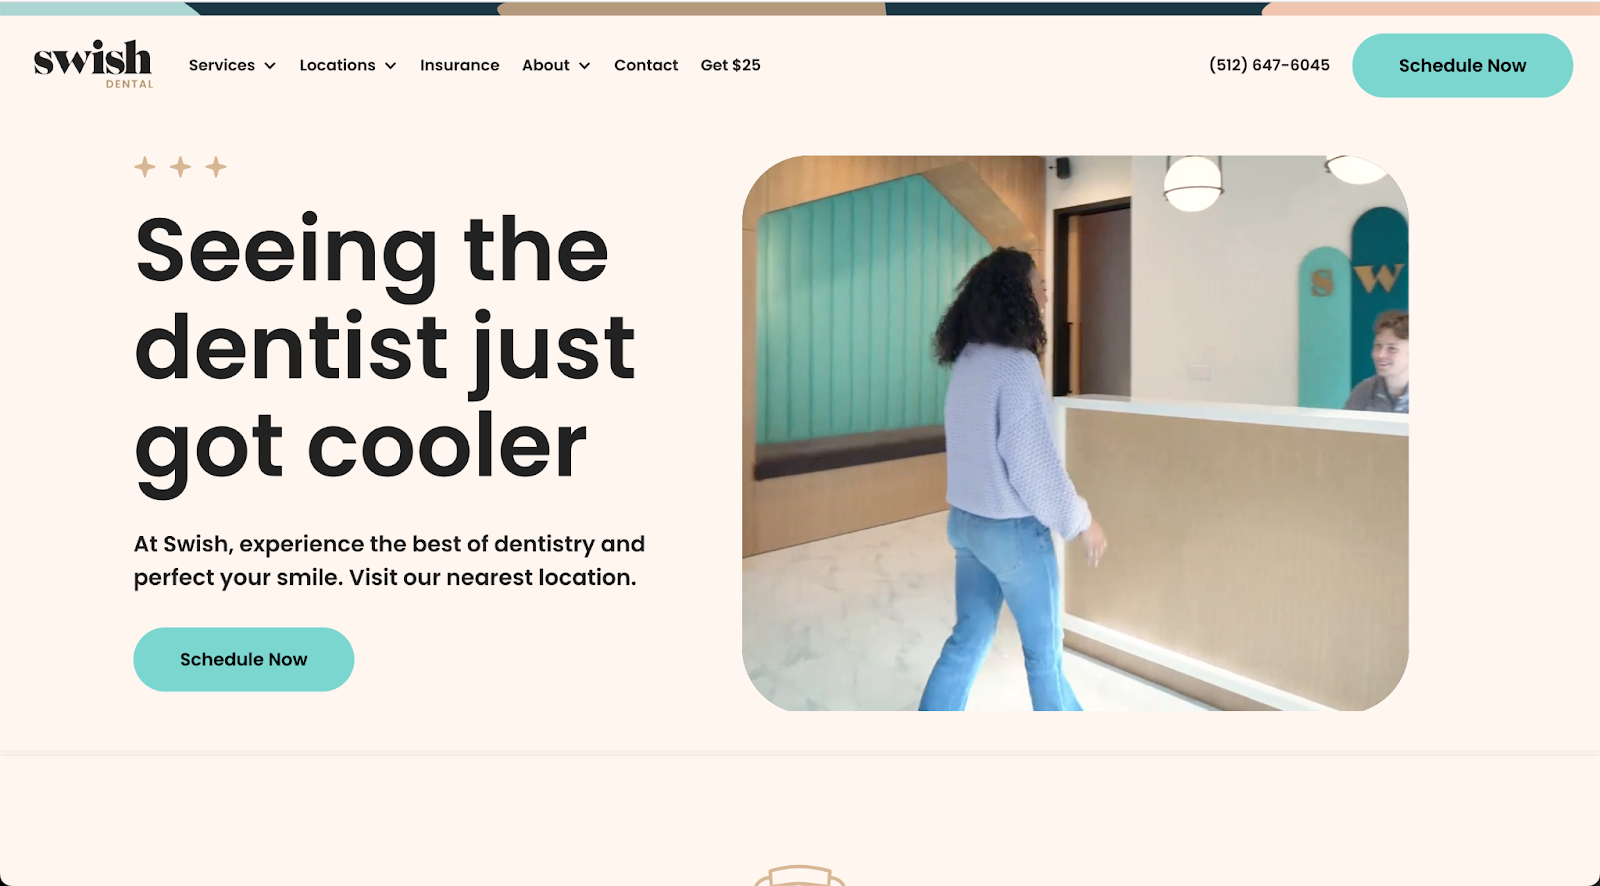 A unique website design for the Swish dental practice can serve as your inspiration for your next dental website project